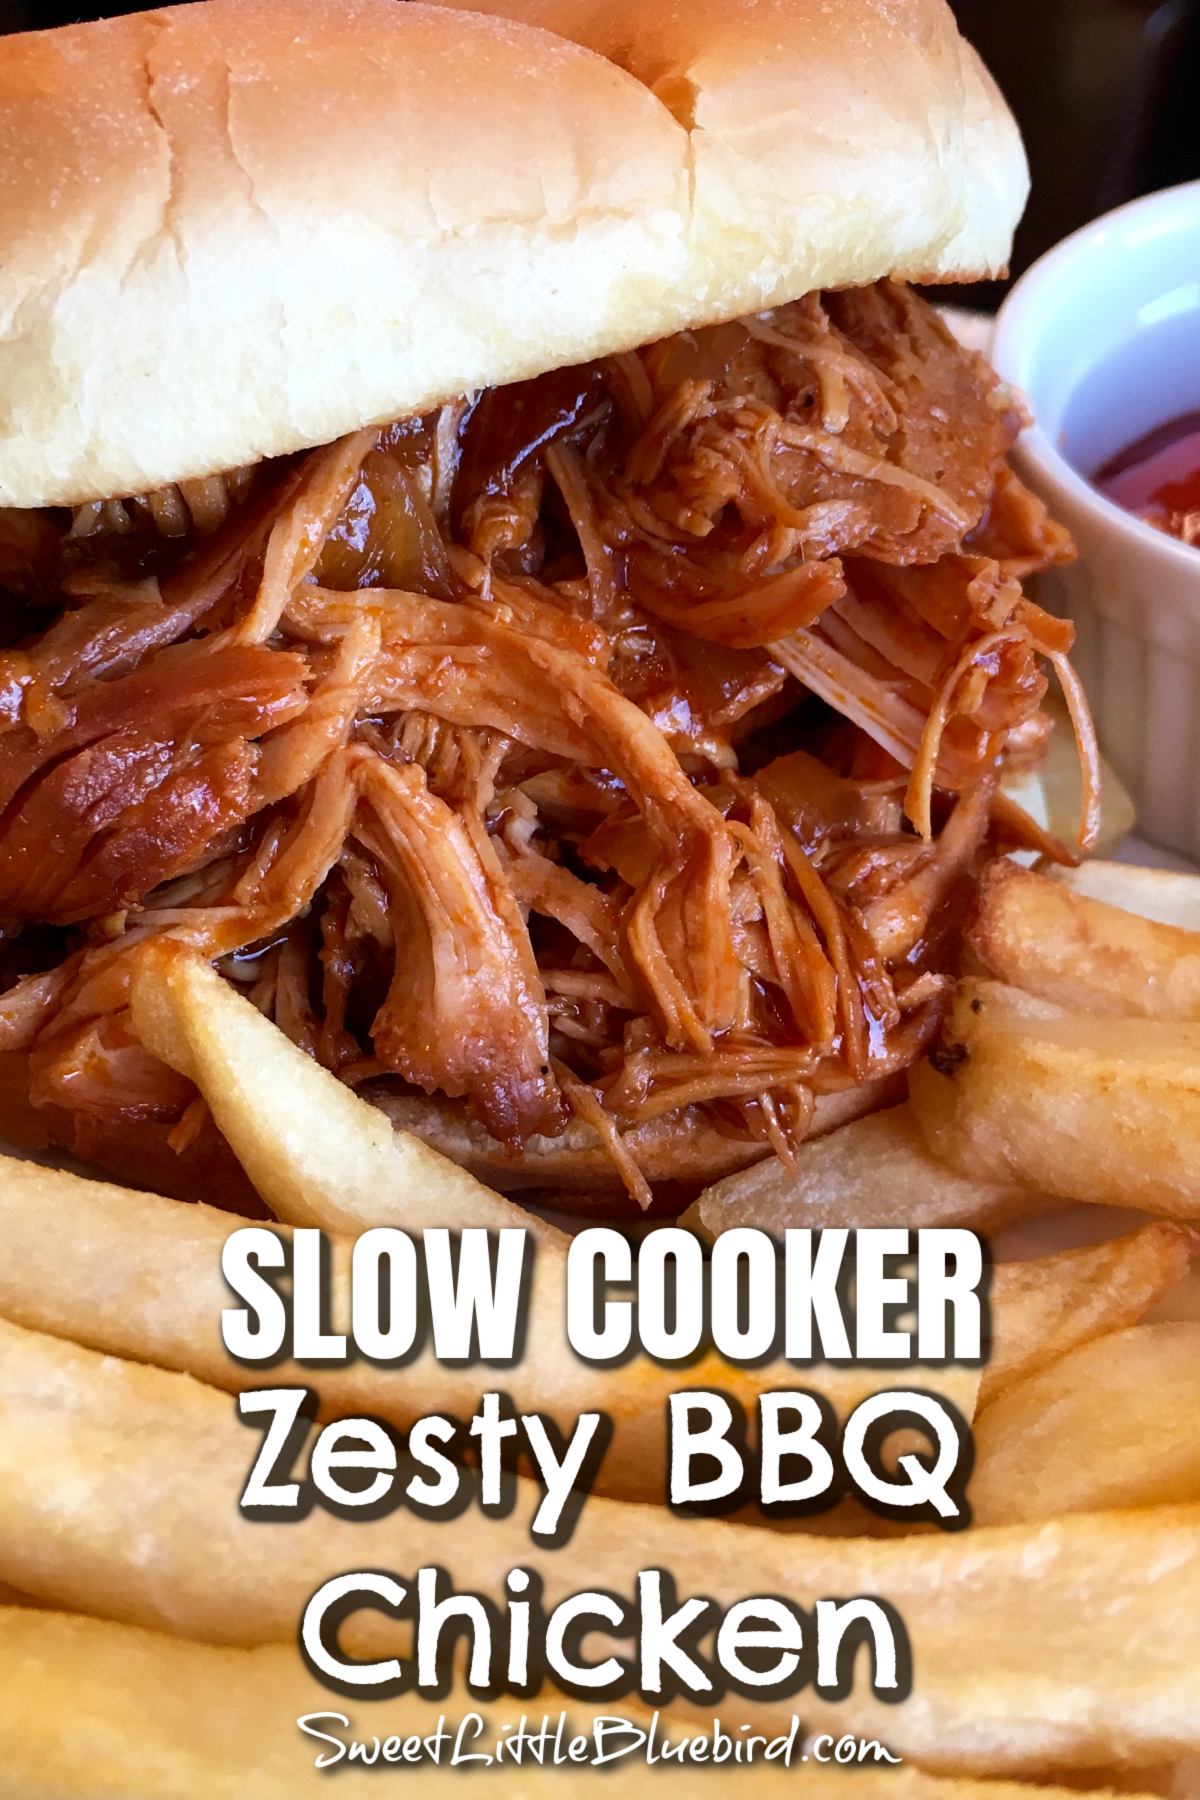 This image shows Zest BBQ Chicken on a roll with a side of french fries. 